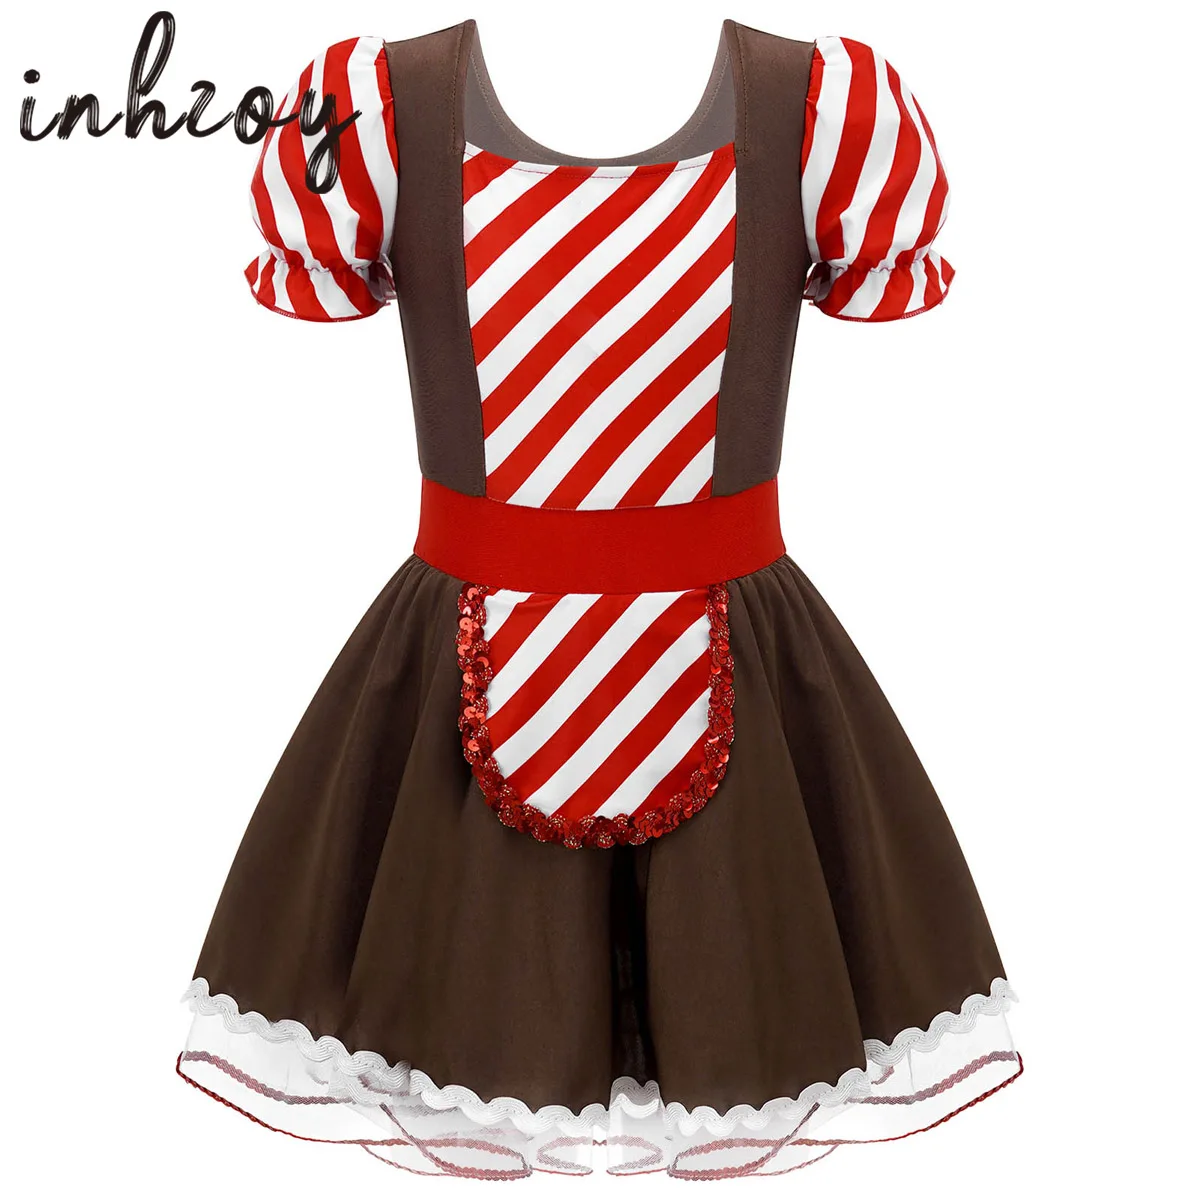 Gingerbread Costume Kids Girls Holiday Cookie Role Play Dress Up Leotard Tutu Dress Christmas Halloween Lace Trim Maid Cosplay